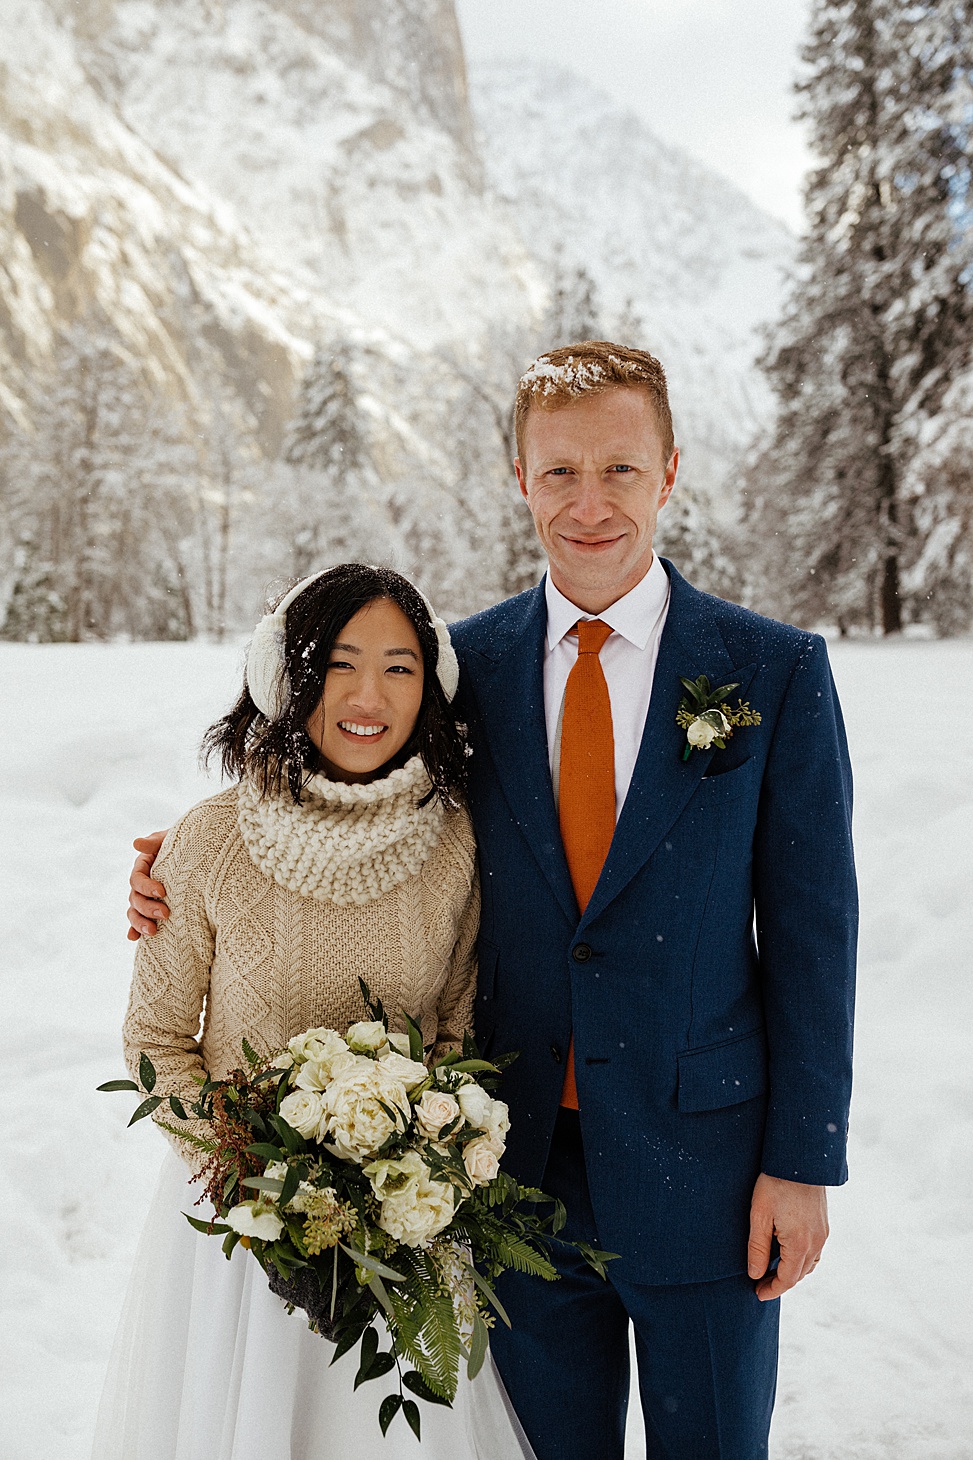 This beautiful couple tied the knot in Yosemite Park in winter and enjoyed hiking in the snow